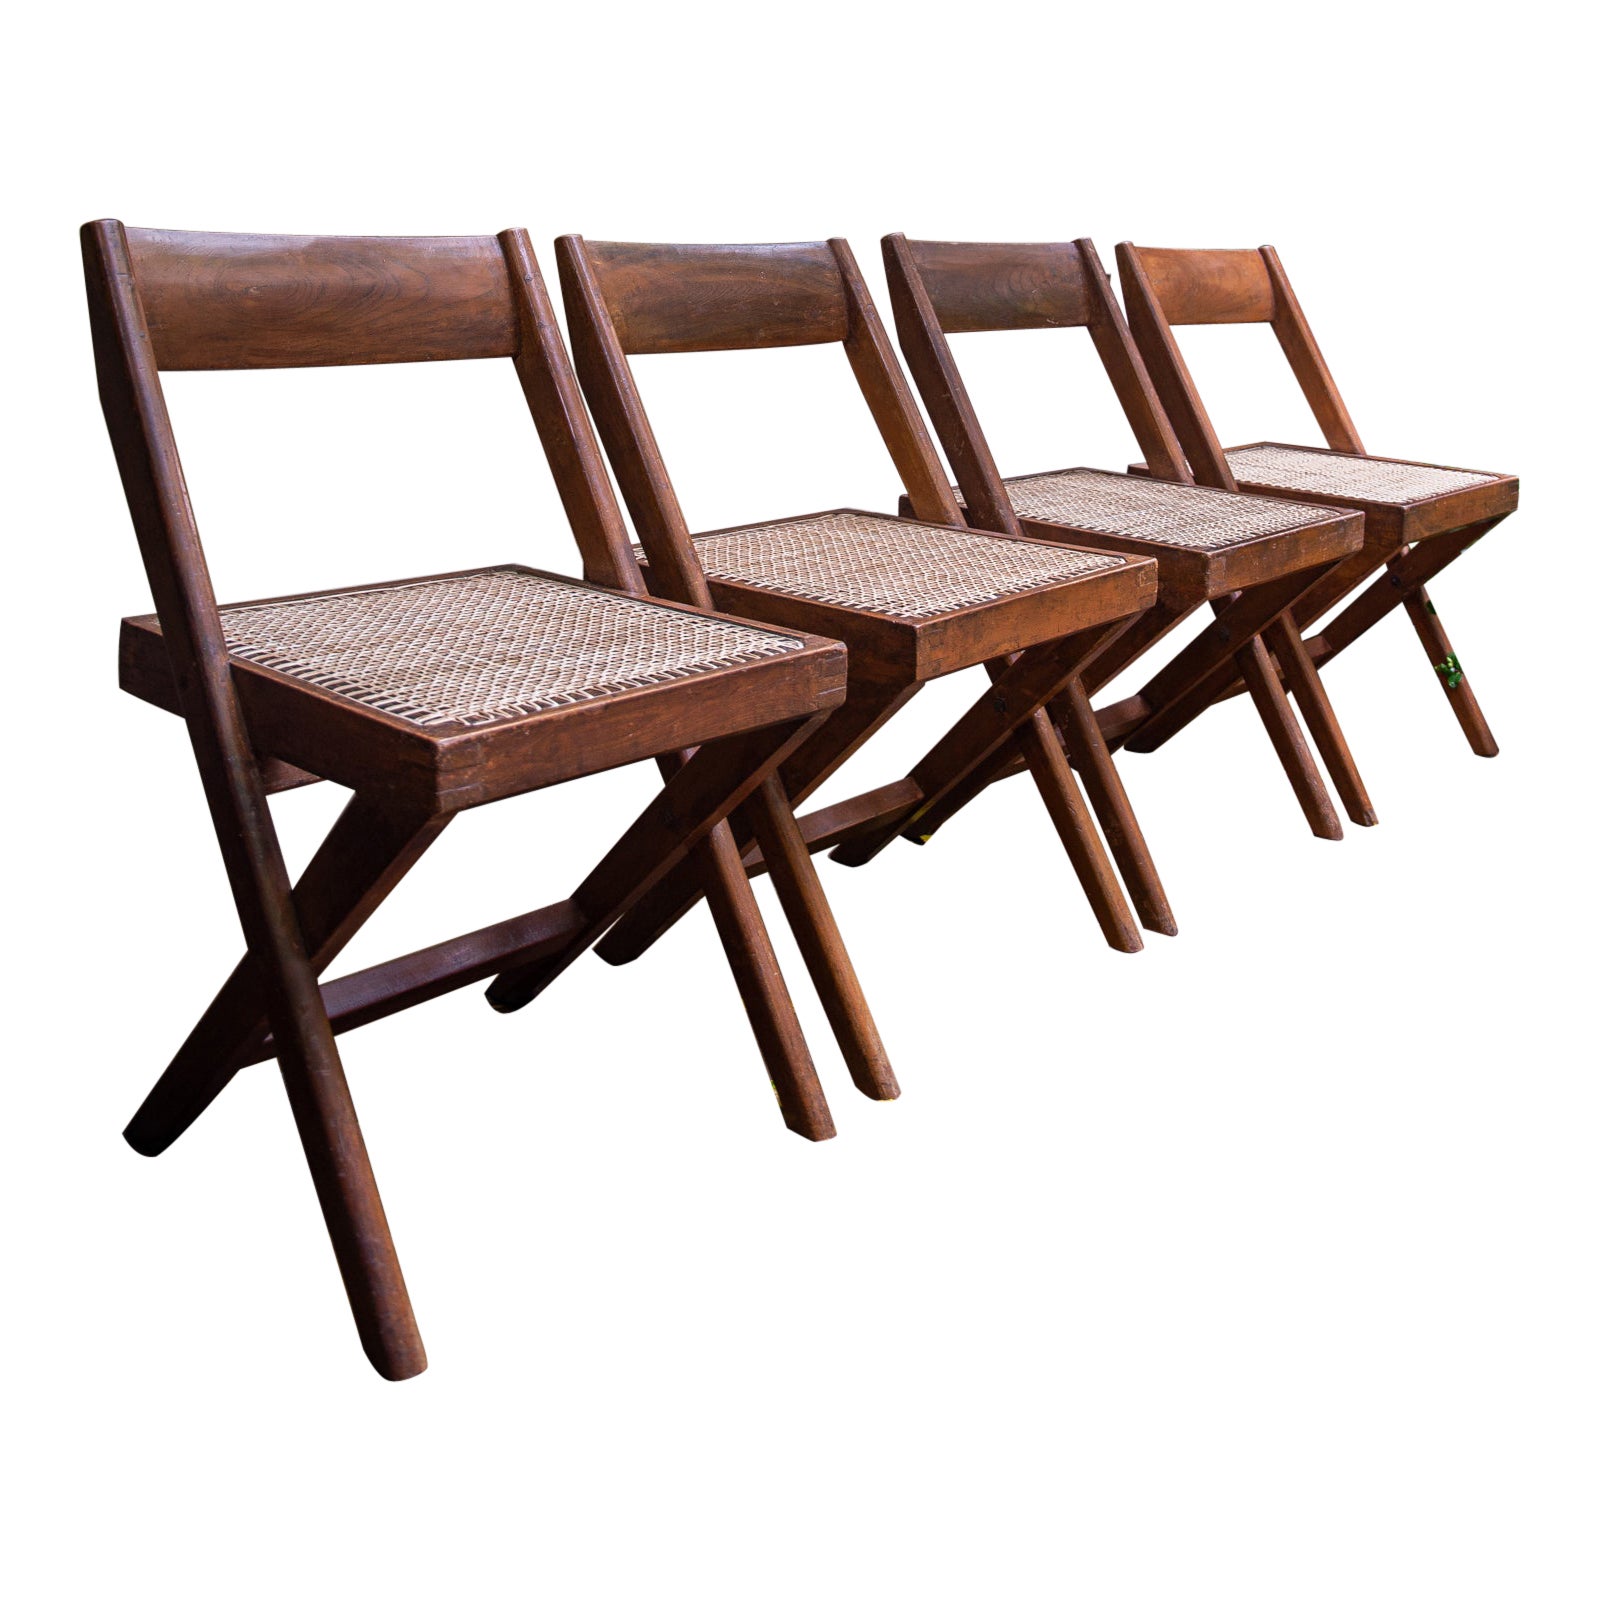 Four X Frame Chairs by Pierre Jeanneret & Eulie Chowdhury, Chandigarh India 1959 For Sale